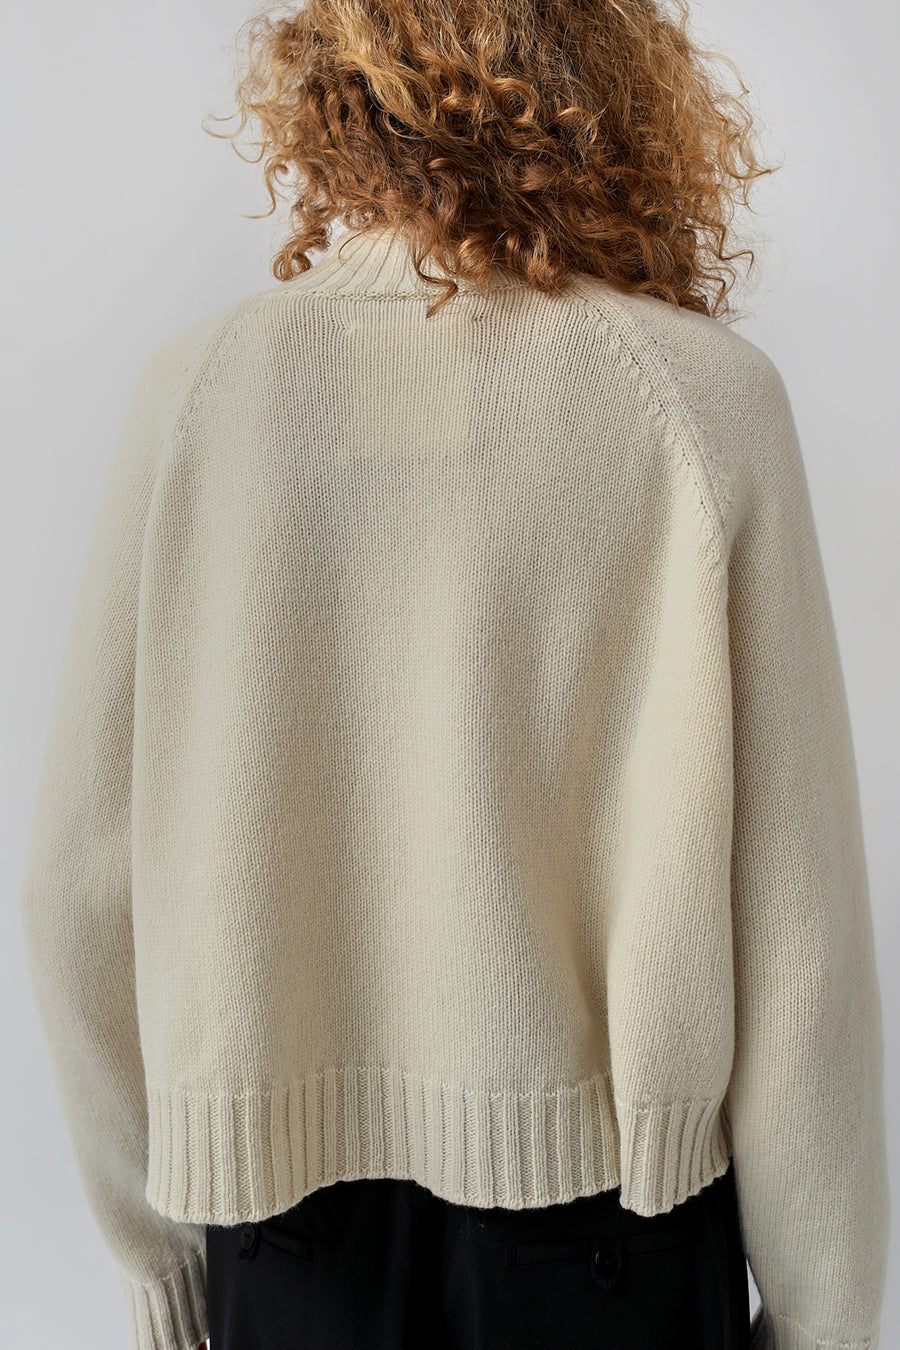 CORDERA Wool and Cashmere Asymmetric Neck Sweater in Natural